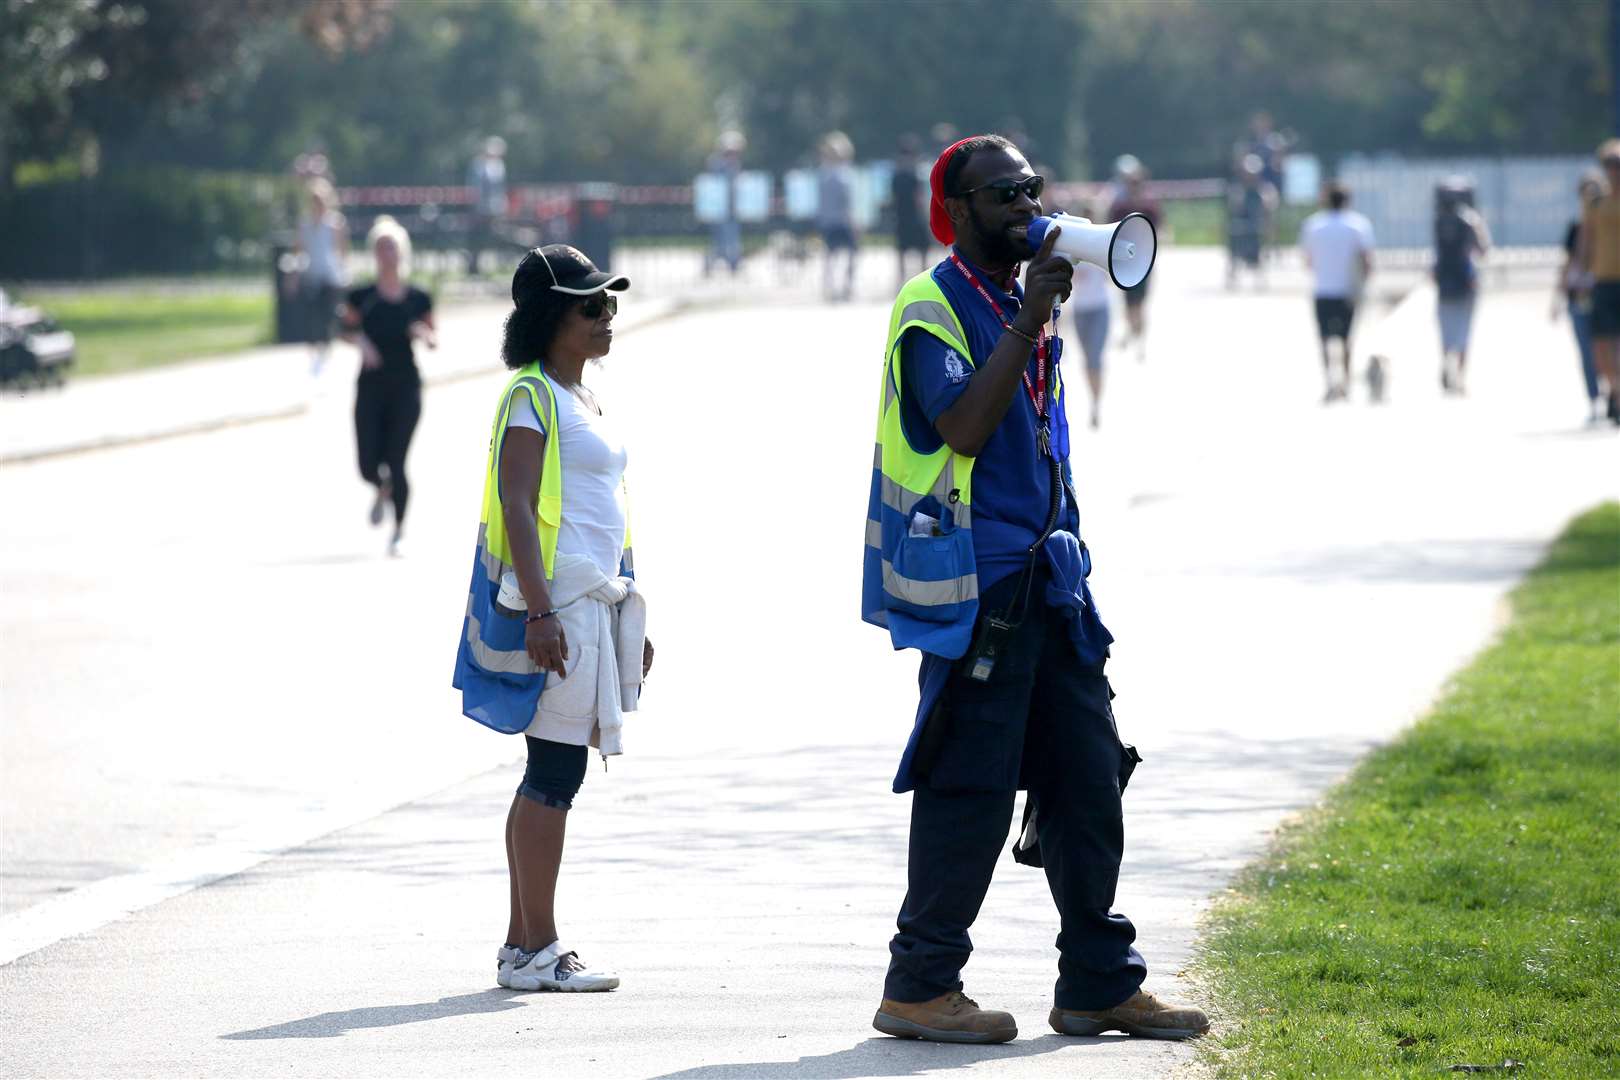 Wardens use a megaphone to issue advice at Victoria Park, east London (Jonathan Brady/PA)